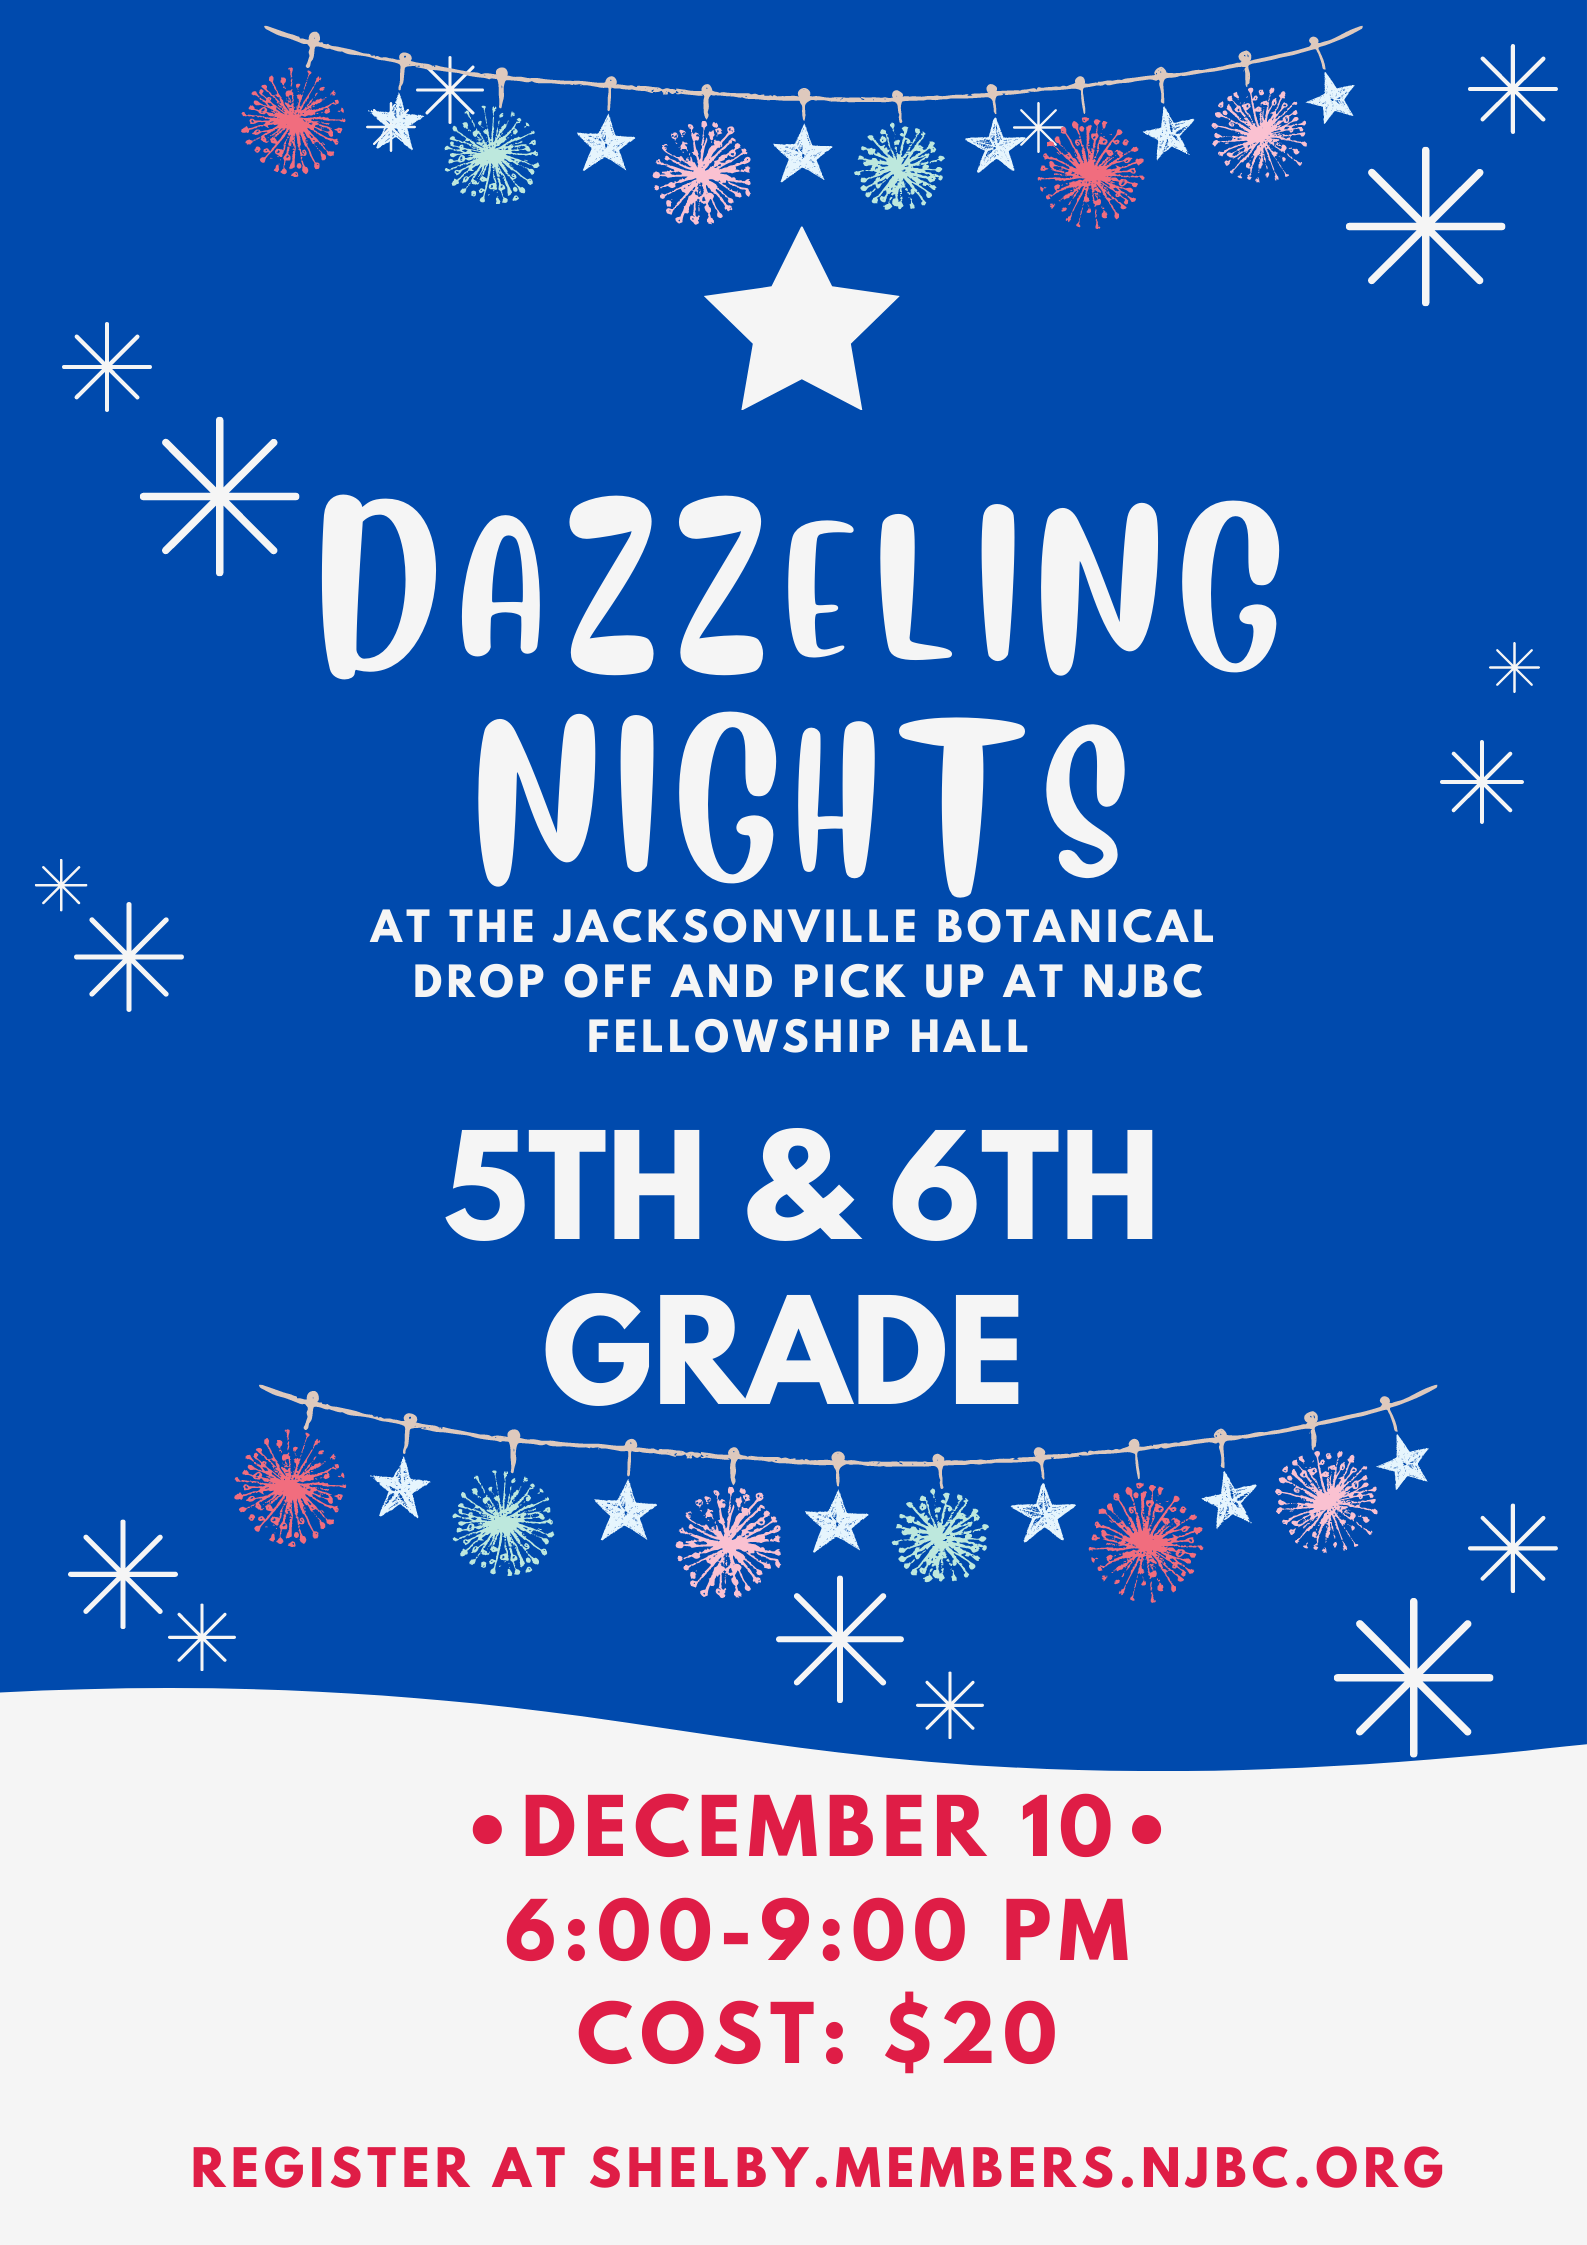 5th and 6th Grade Dazzeling Nights Event Dec 10